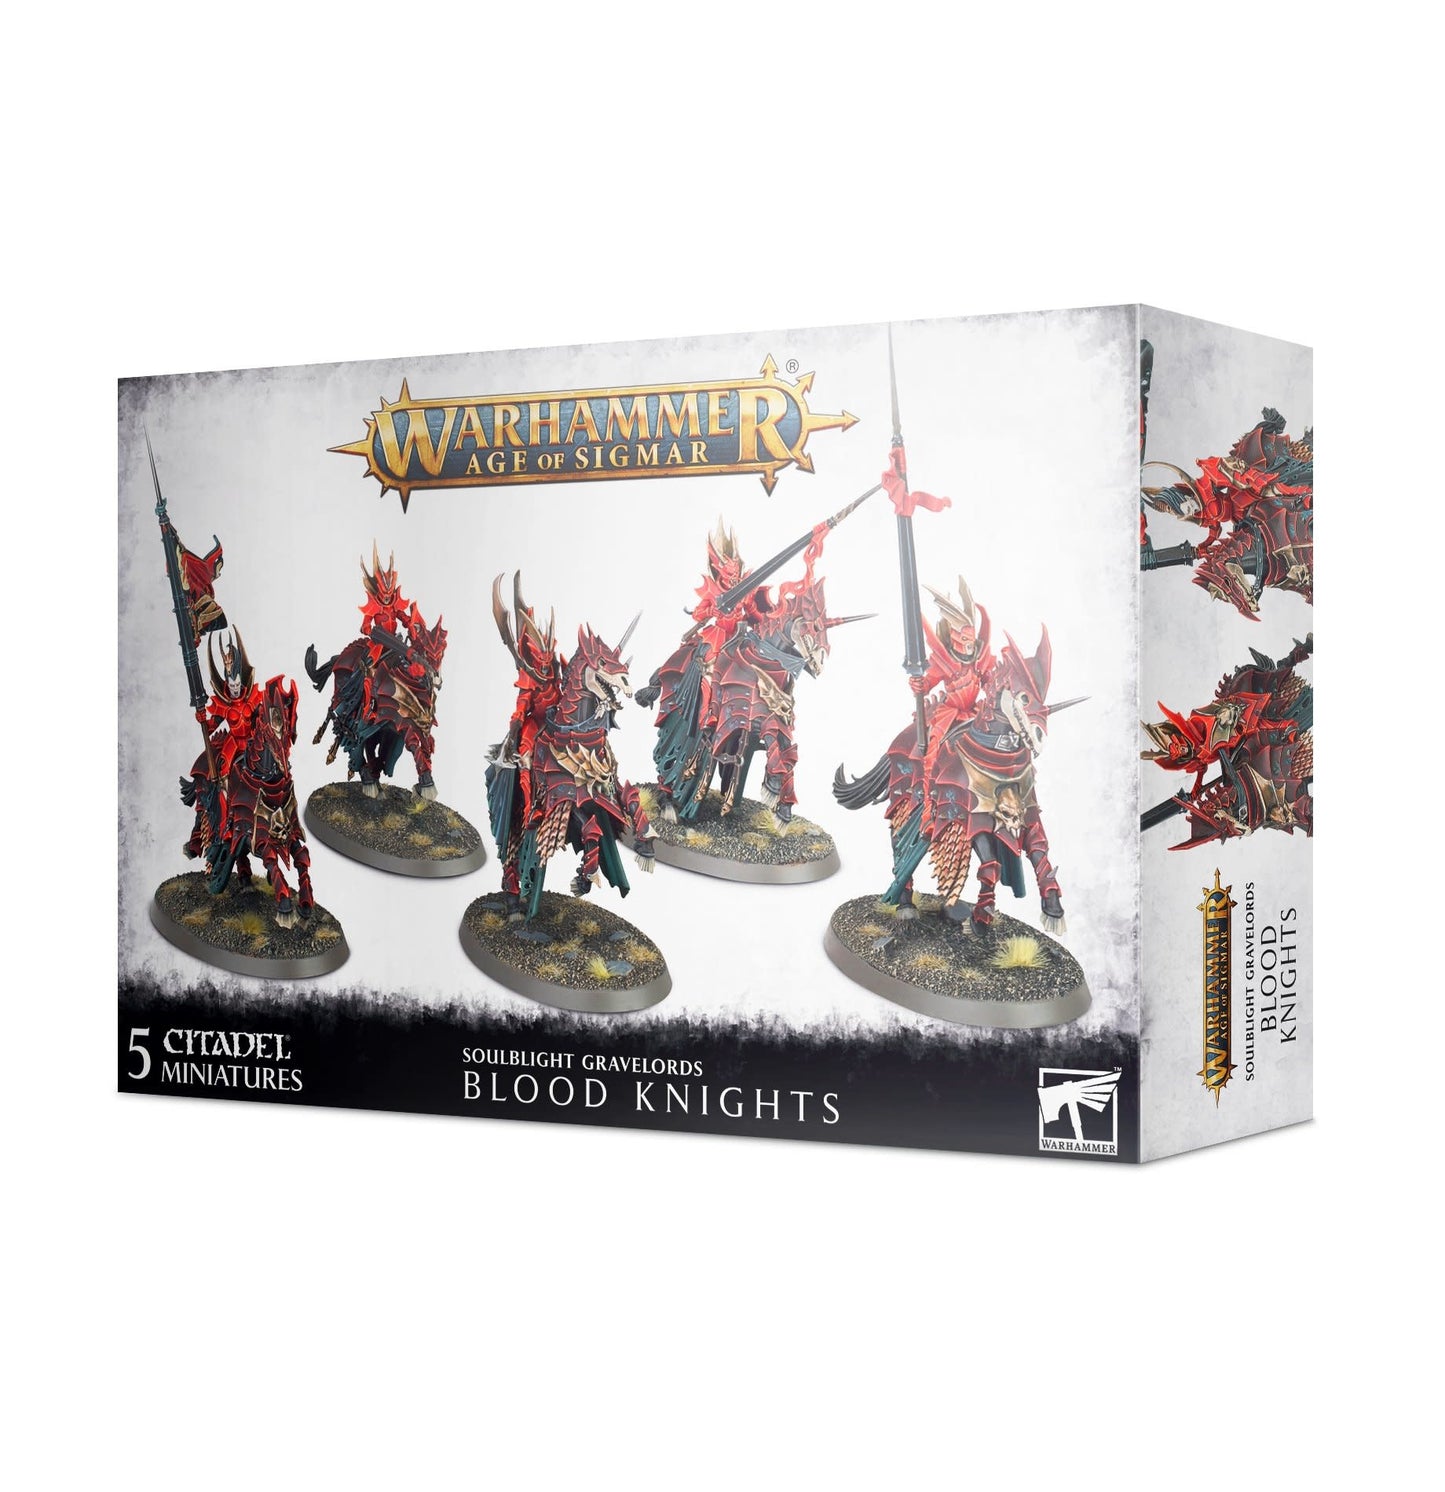 Blood Knights - Warhammer: Age of Sigmar - The Hooded Goblin